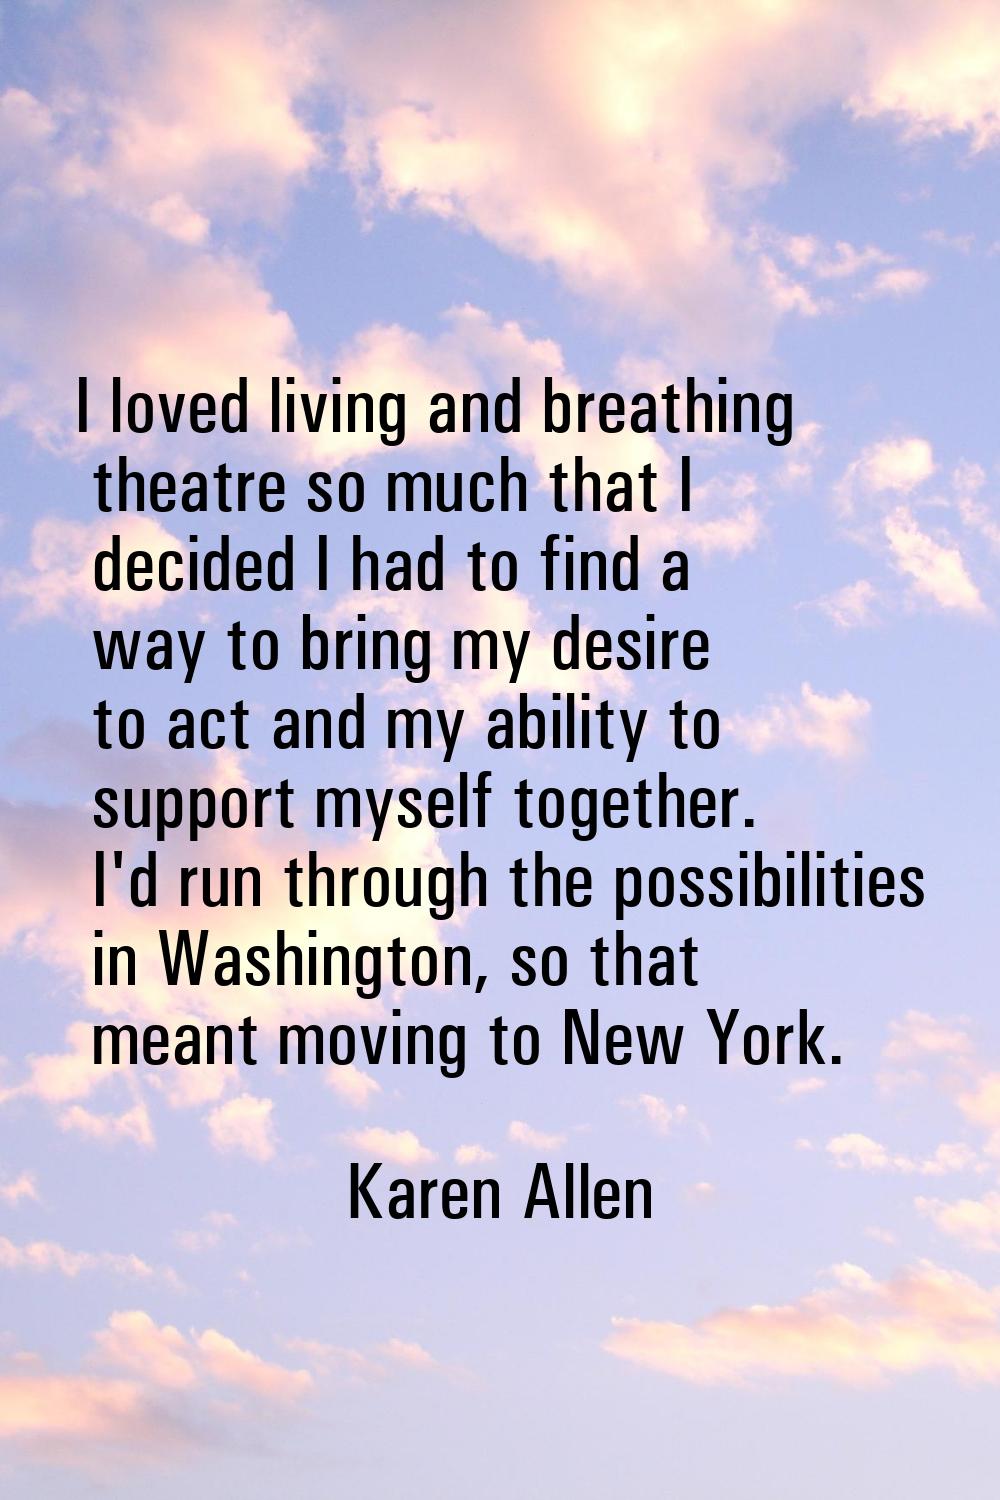 I loved living and breathing theatre so much that I decided I had to find a way to bring my desire 